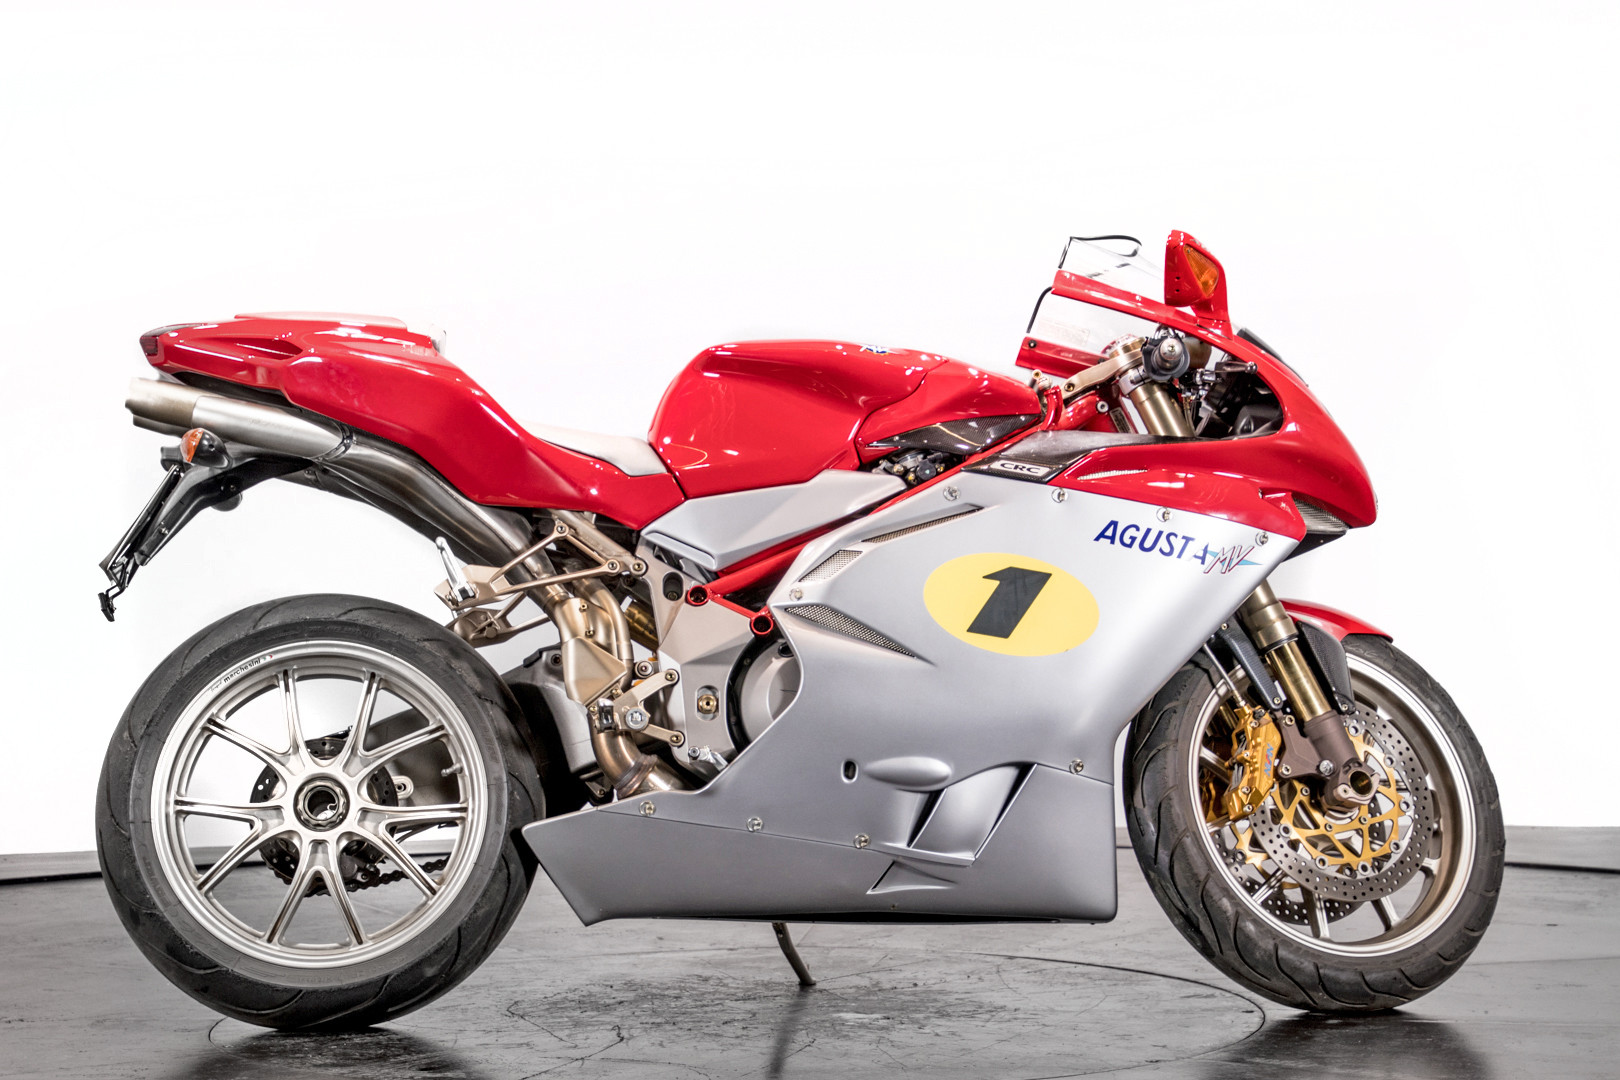 Used 2004 MV Agusta F4 for sale in Essex | Pistonheads